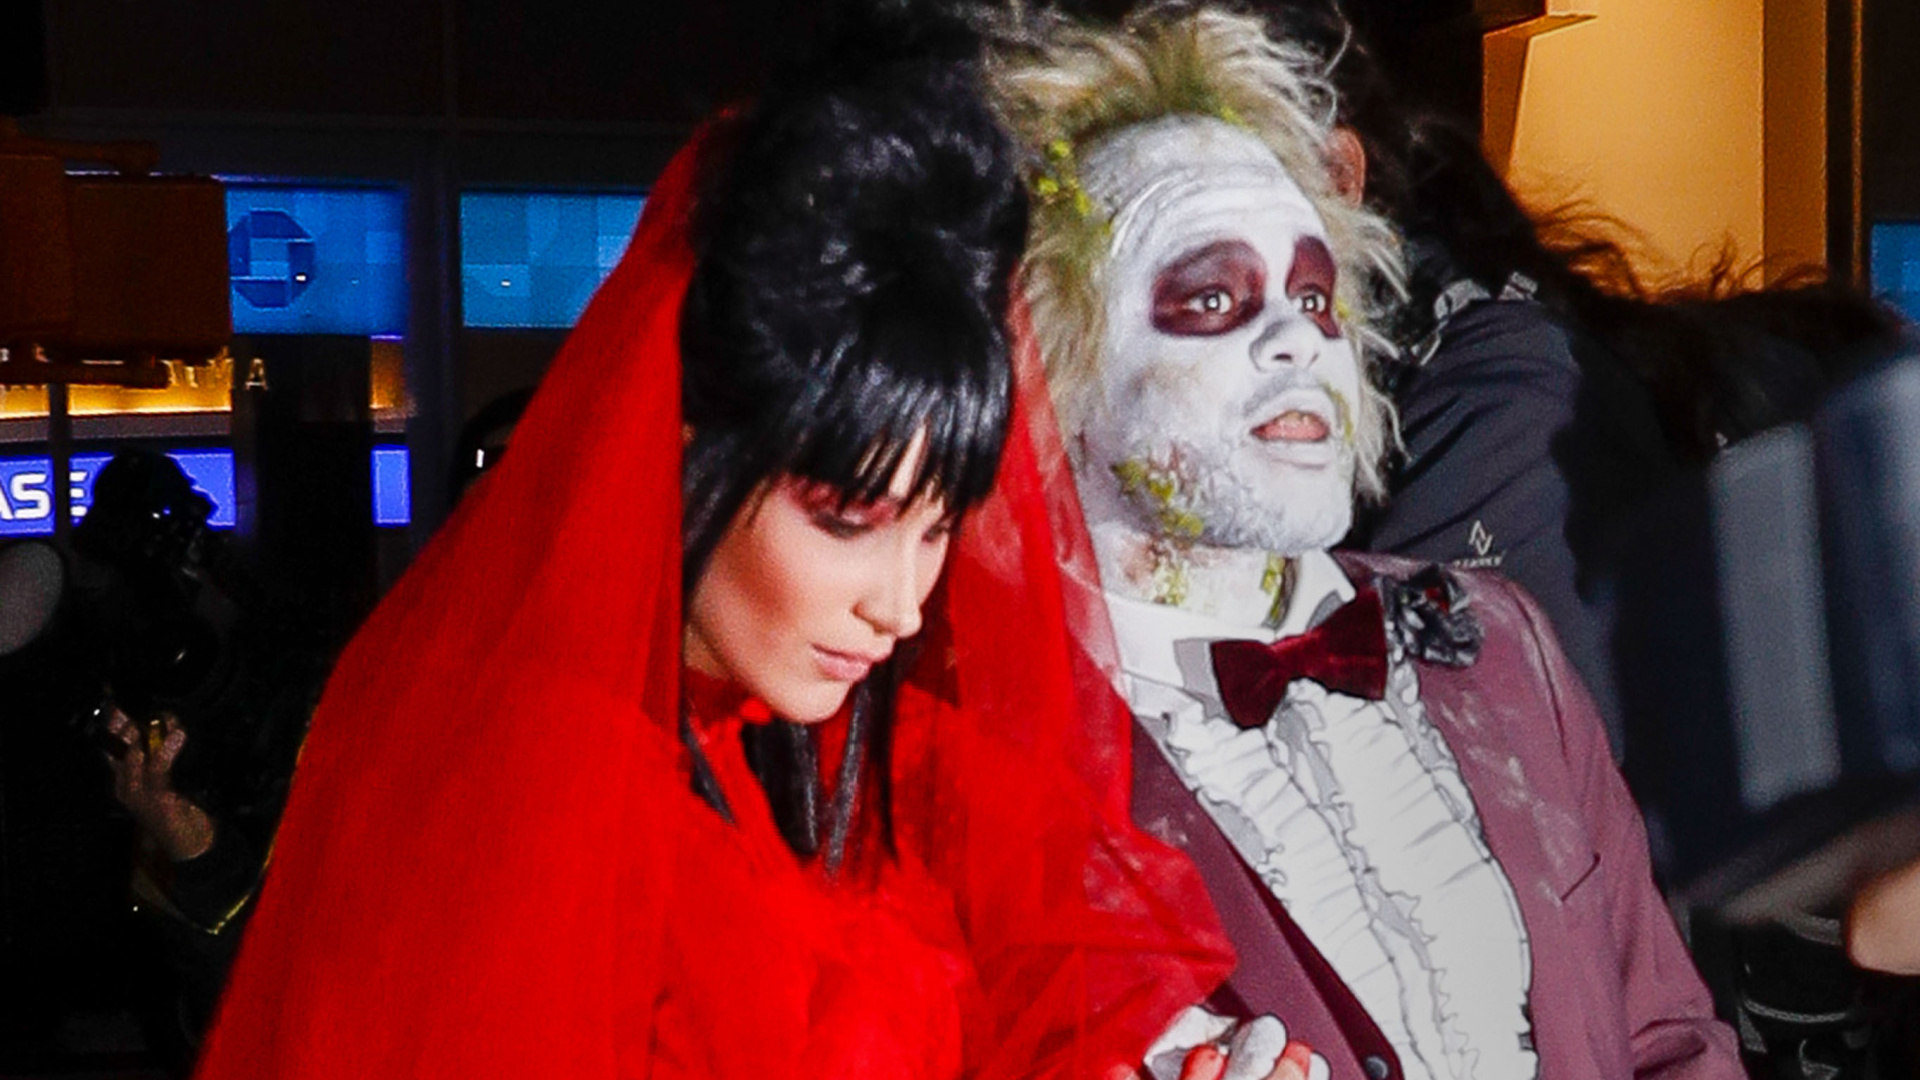 Bella Hadid and The Weeknd as characters from 'Beetlejuice'